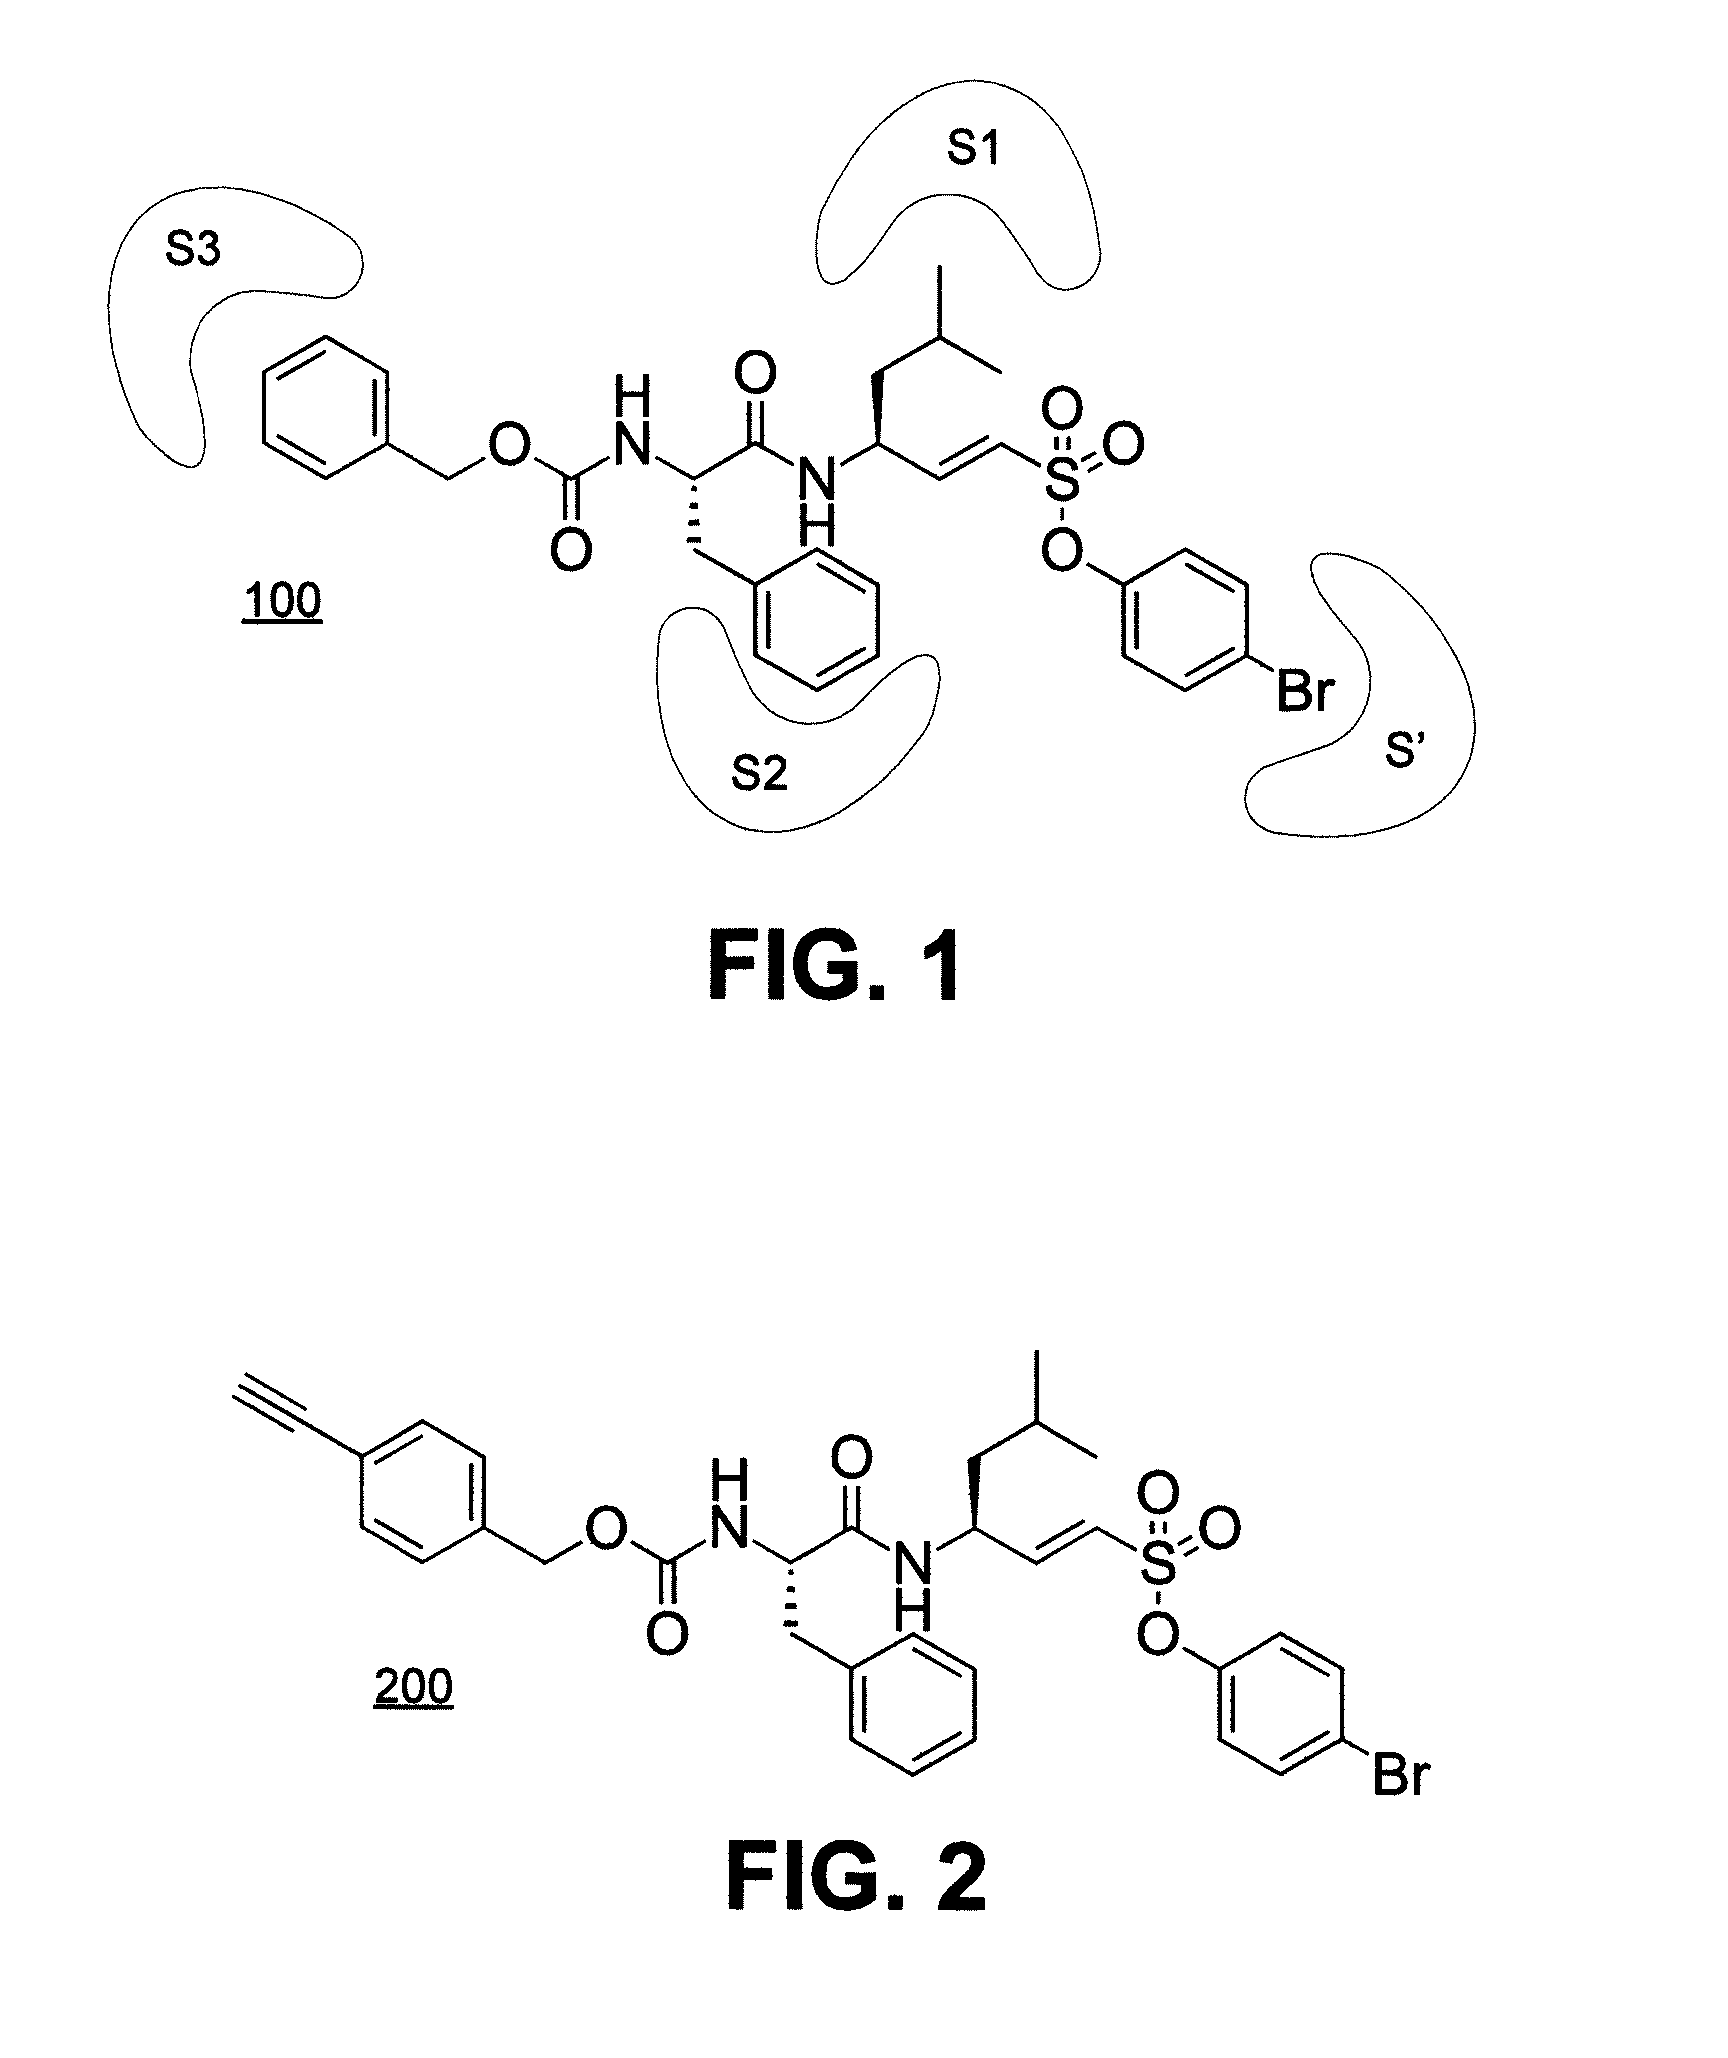 Cathepsin L inhibitors and probes comprising vinyl sulfonate moiety and methods of using same